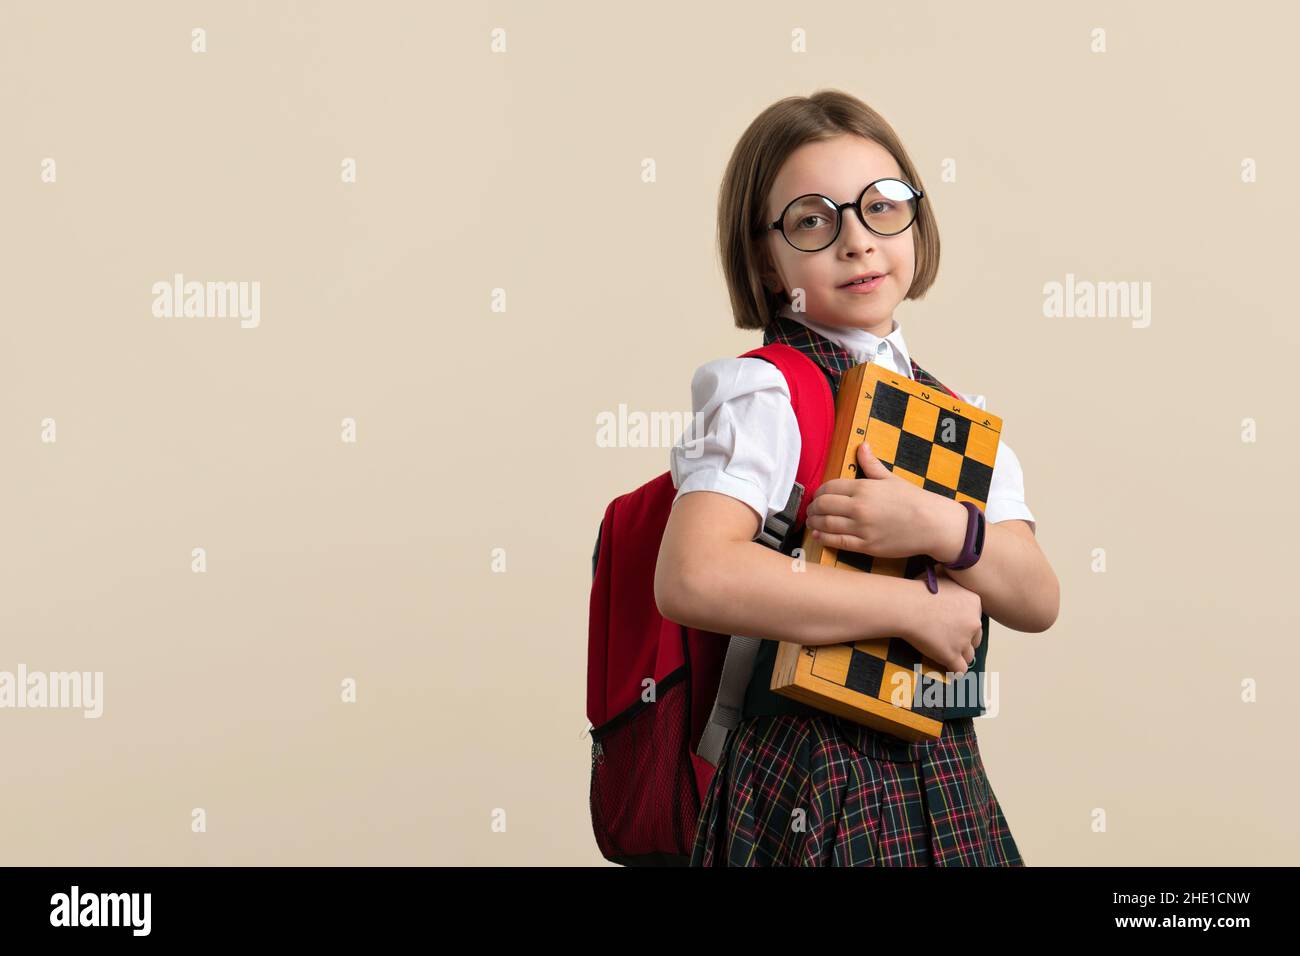 Nerd Little Girl 9s wearing school uniform and glasses holding chessboard. Child chess player with educational game. Learn to play chess. Free space for text Stock Photo